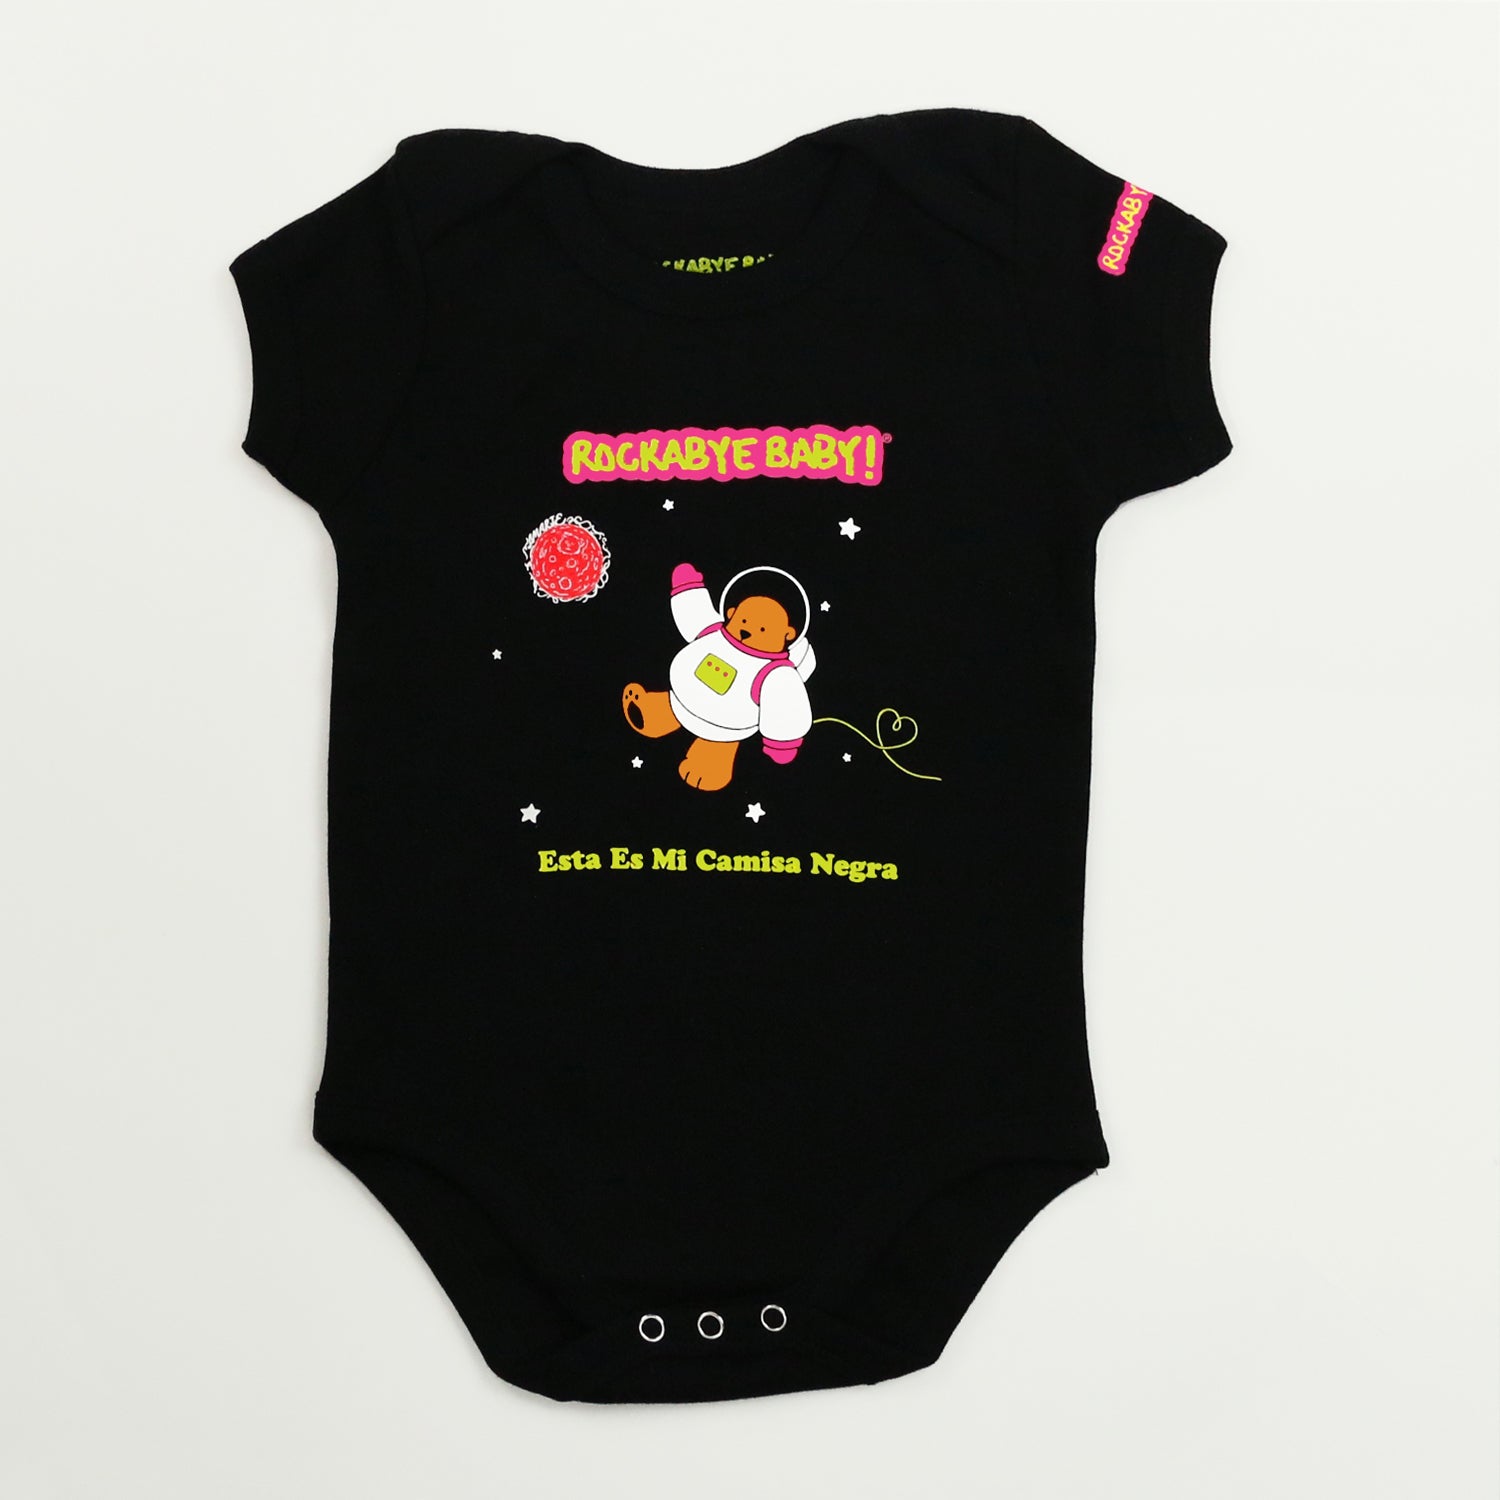 Funny Baby t-shirt Bodysuit, Message Tees, Rock me all night long Rock  star Baby Shower gift, new baby gift ideas goth baby a67